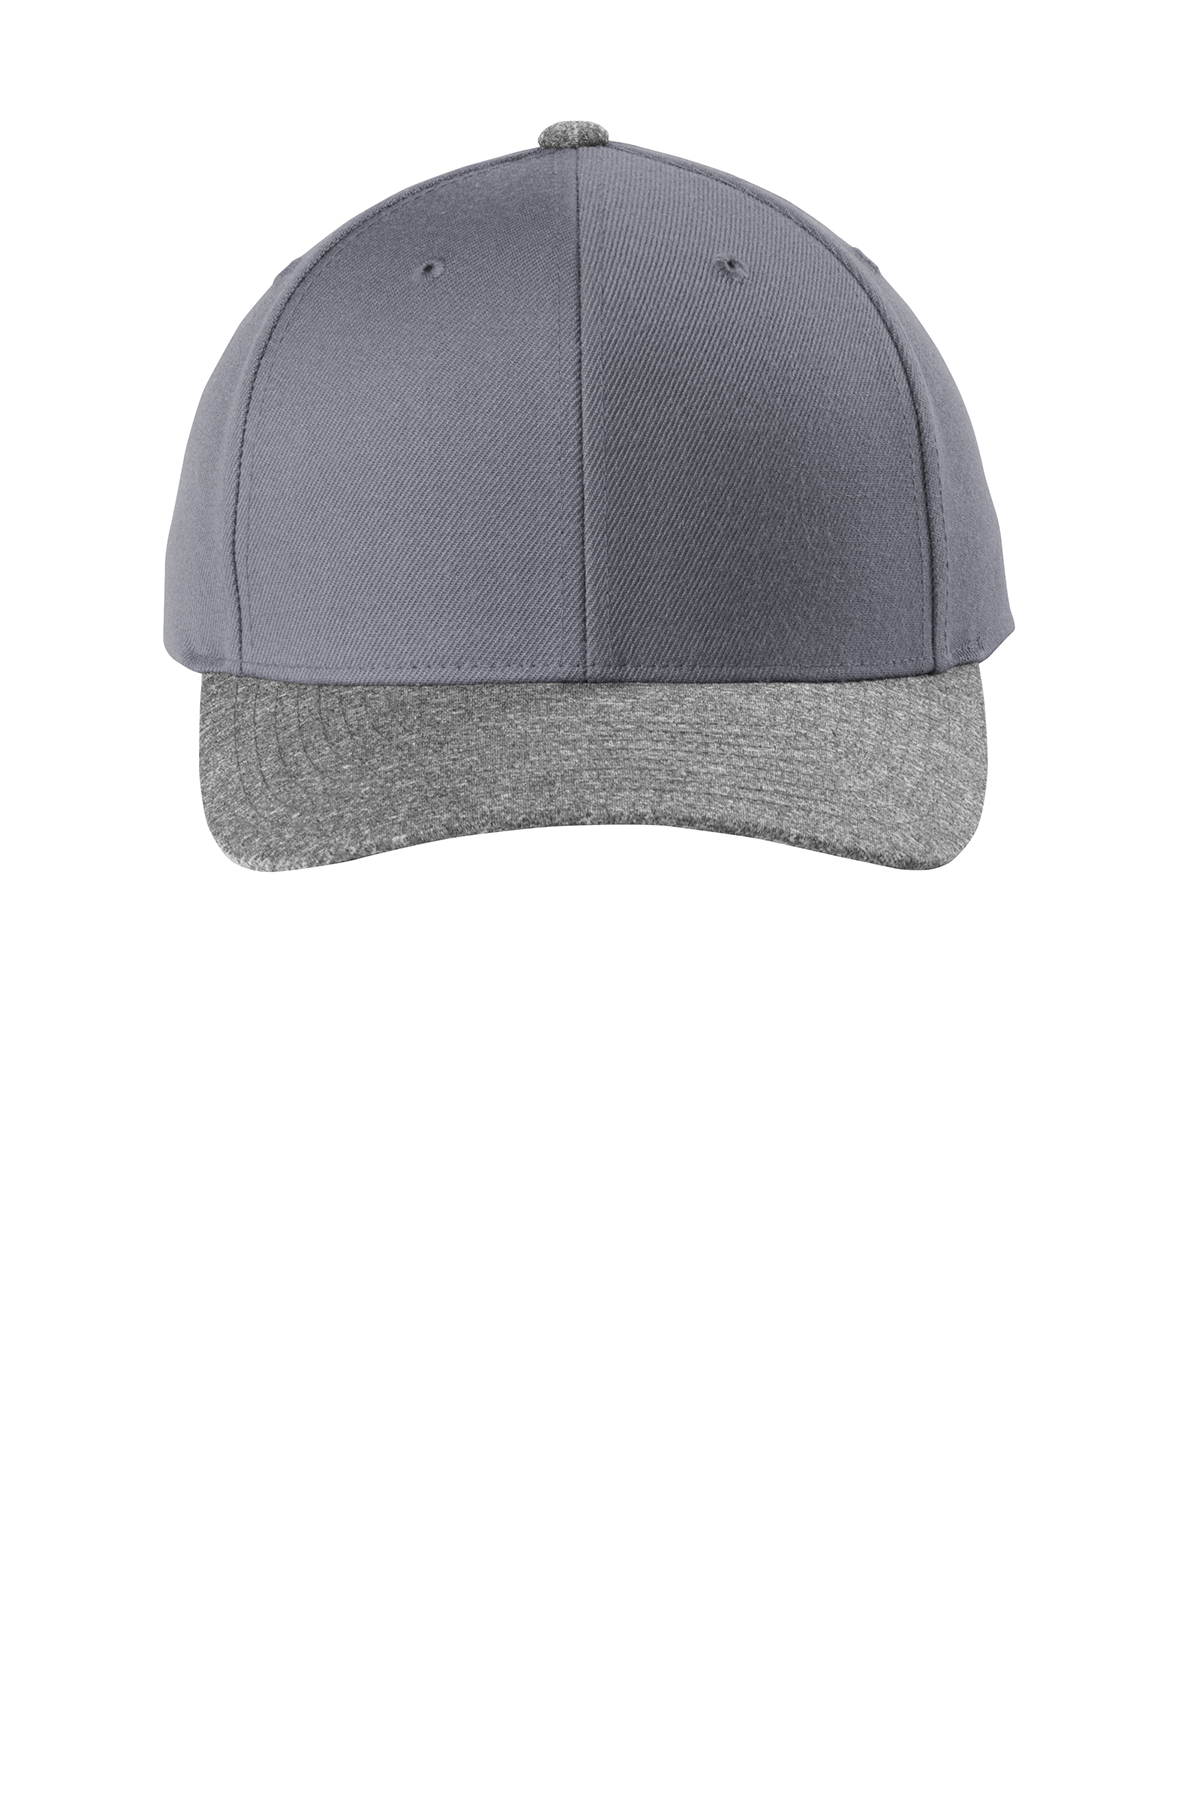 click to view Graphite/ Grey Heather